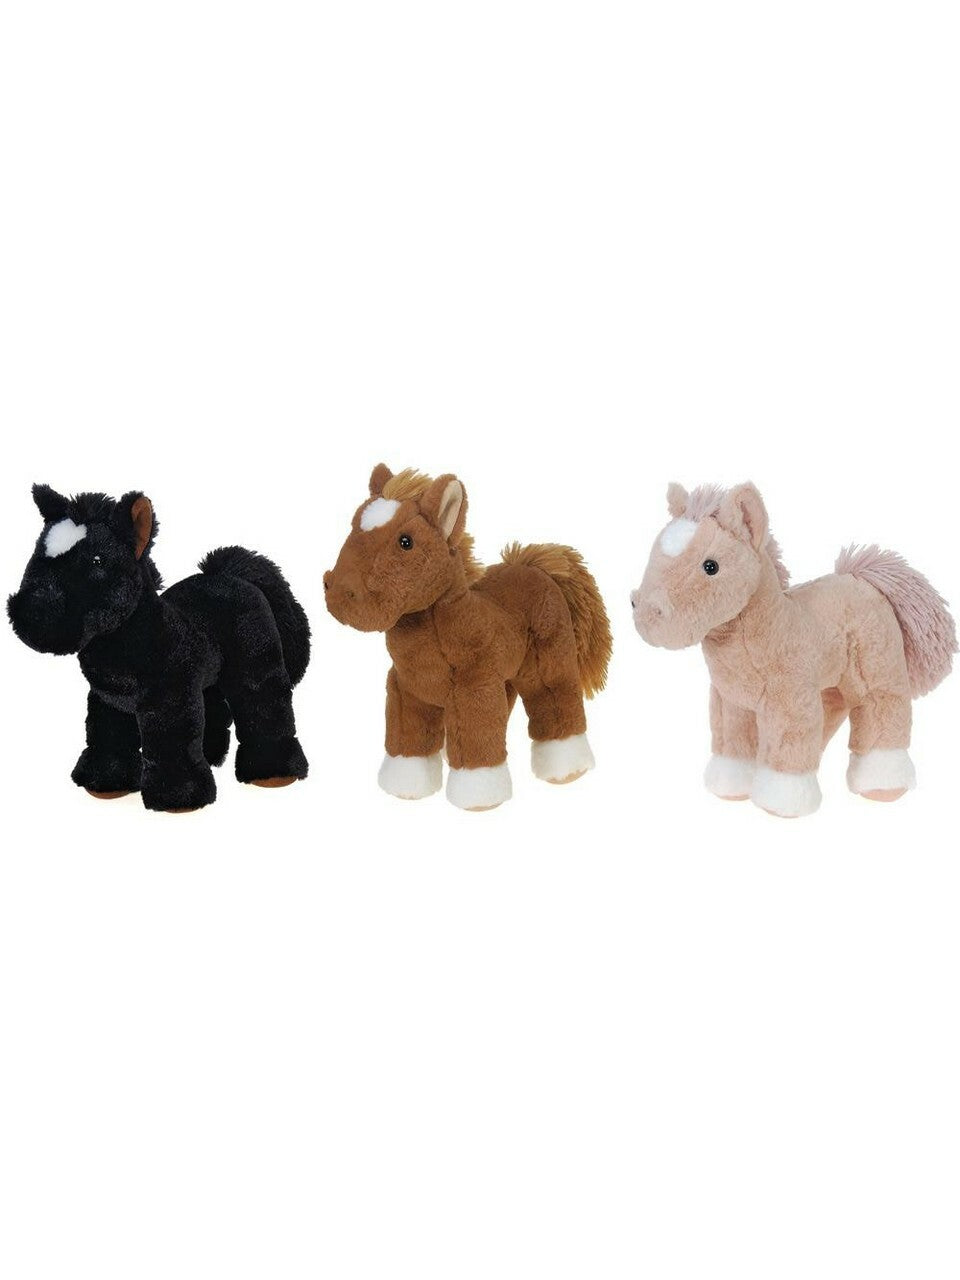 Horse Stuffed Animal - Fiesta Toys- stand up 10.5